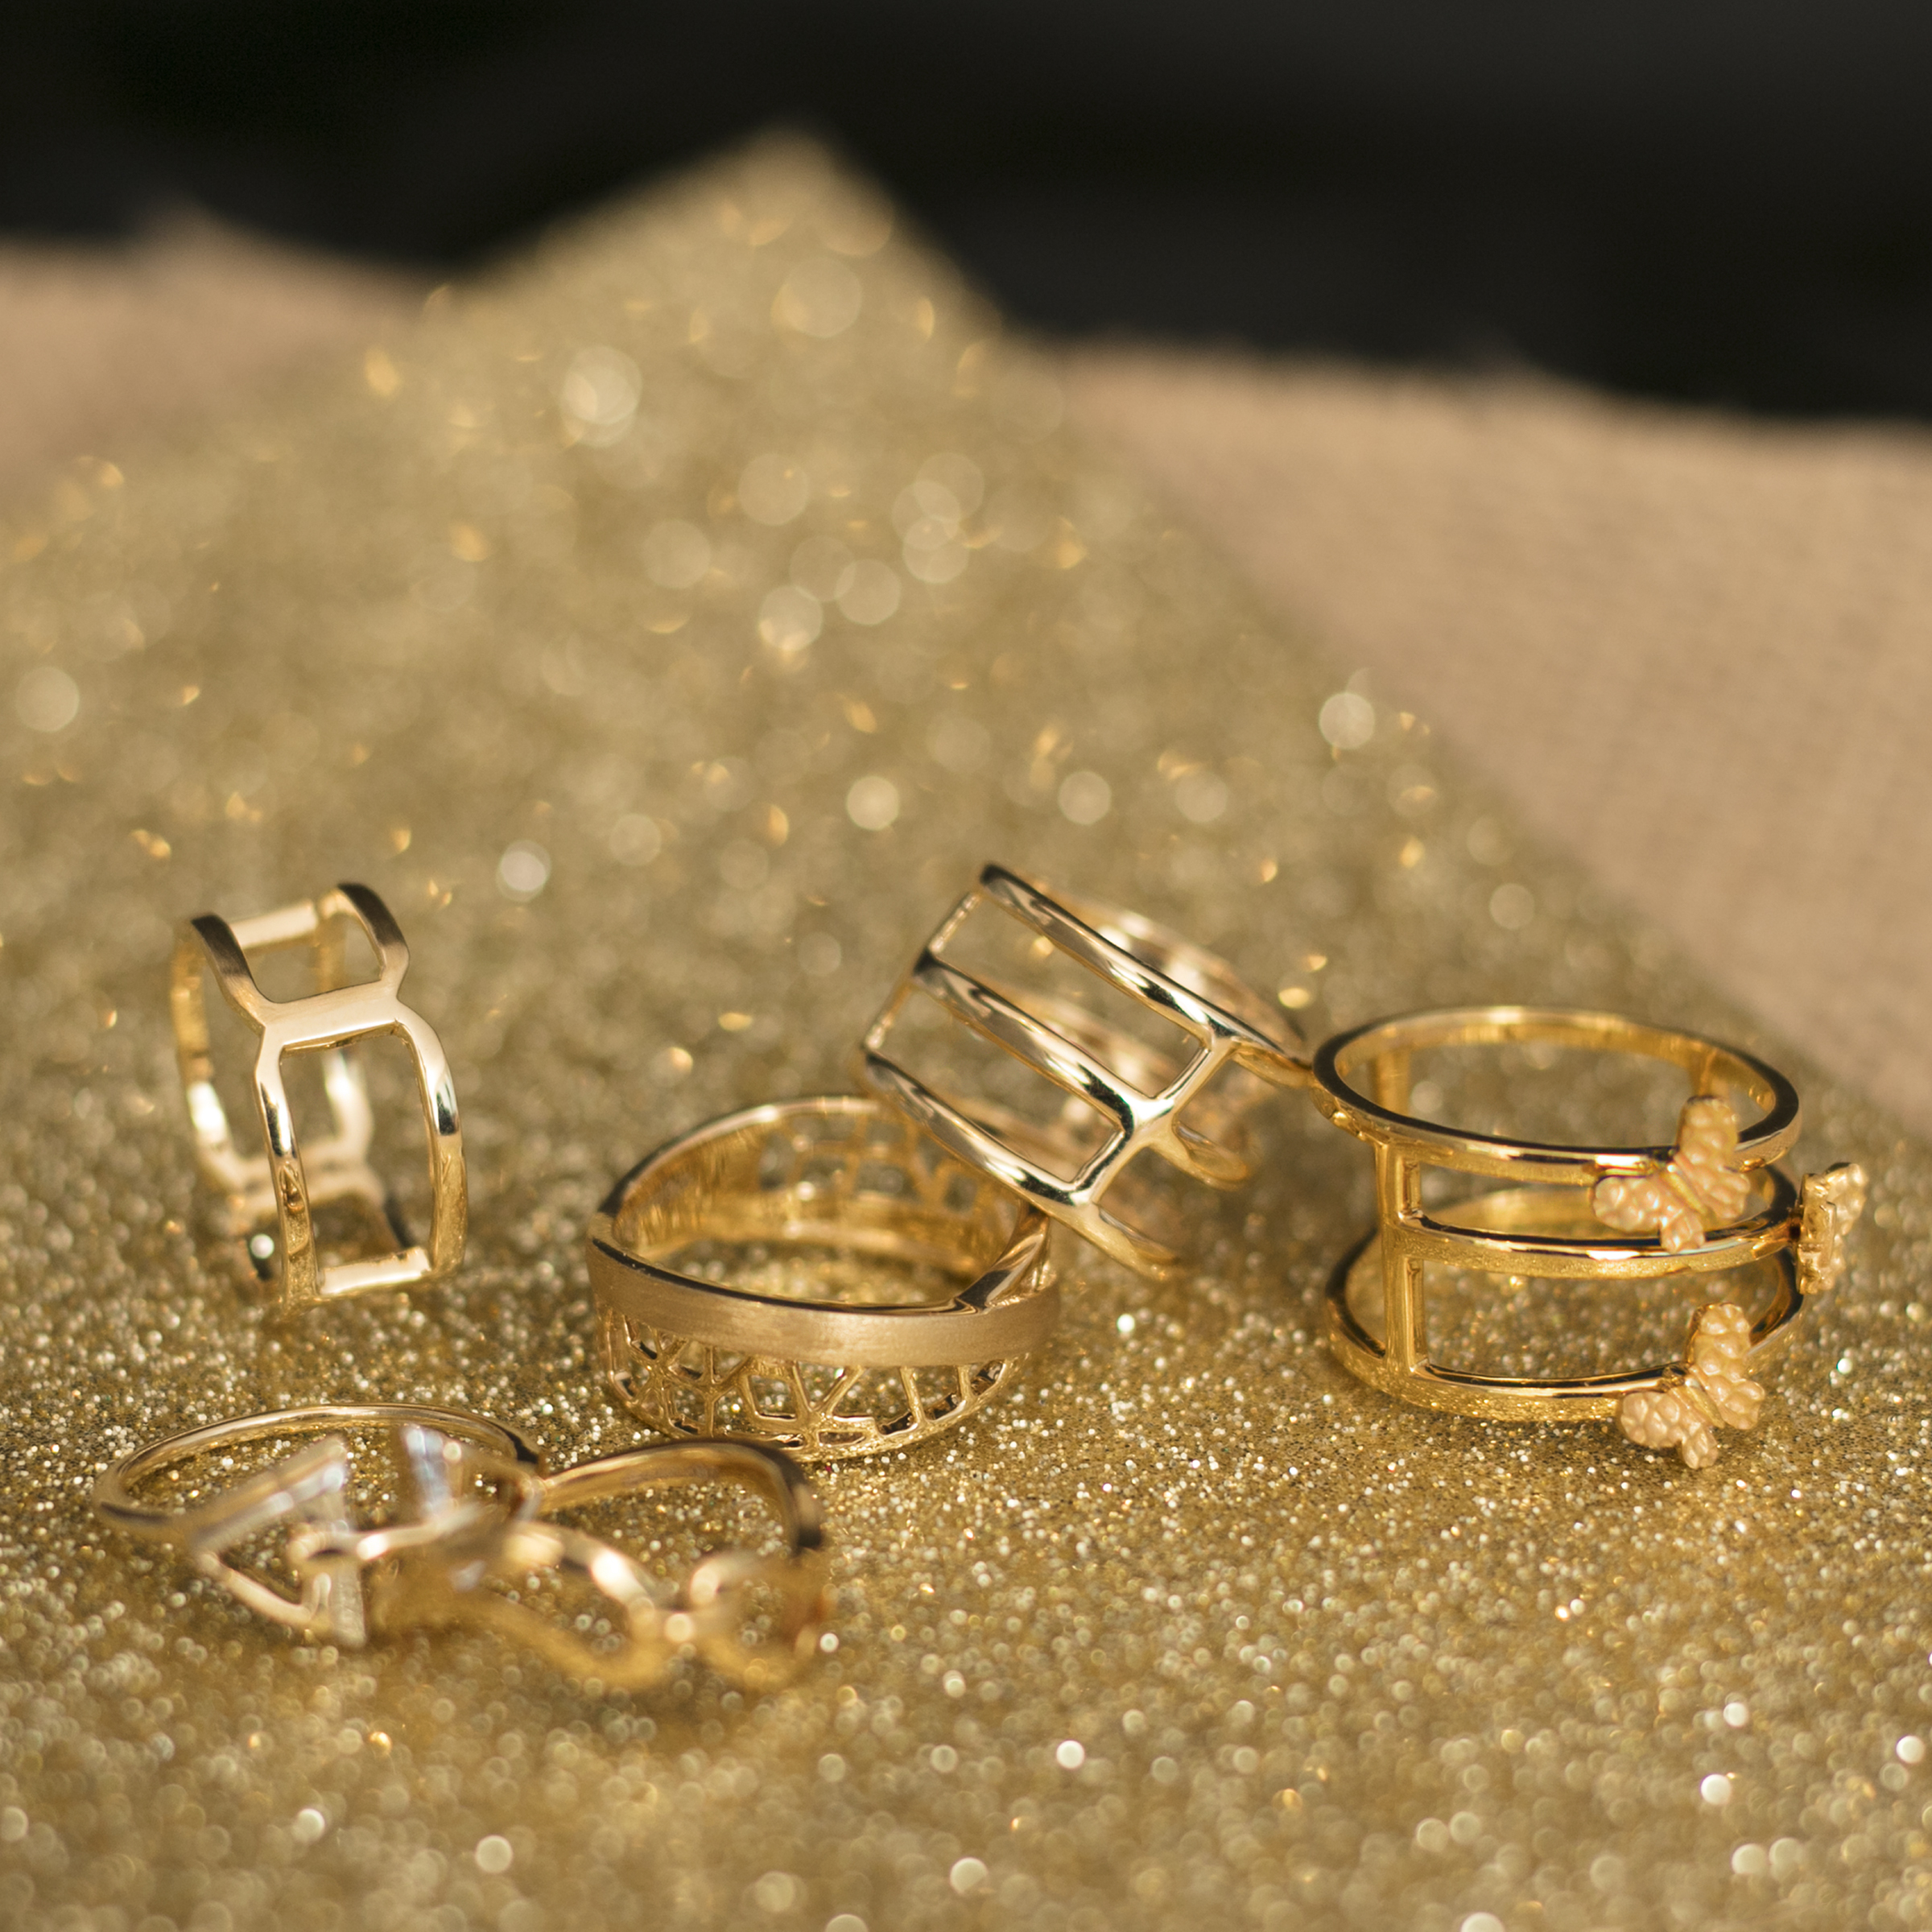 The Gold Jewellery Buying Guide for the Modern Woman!